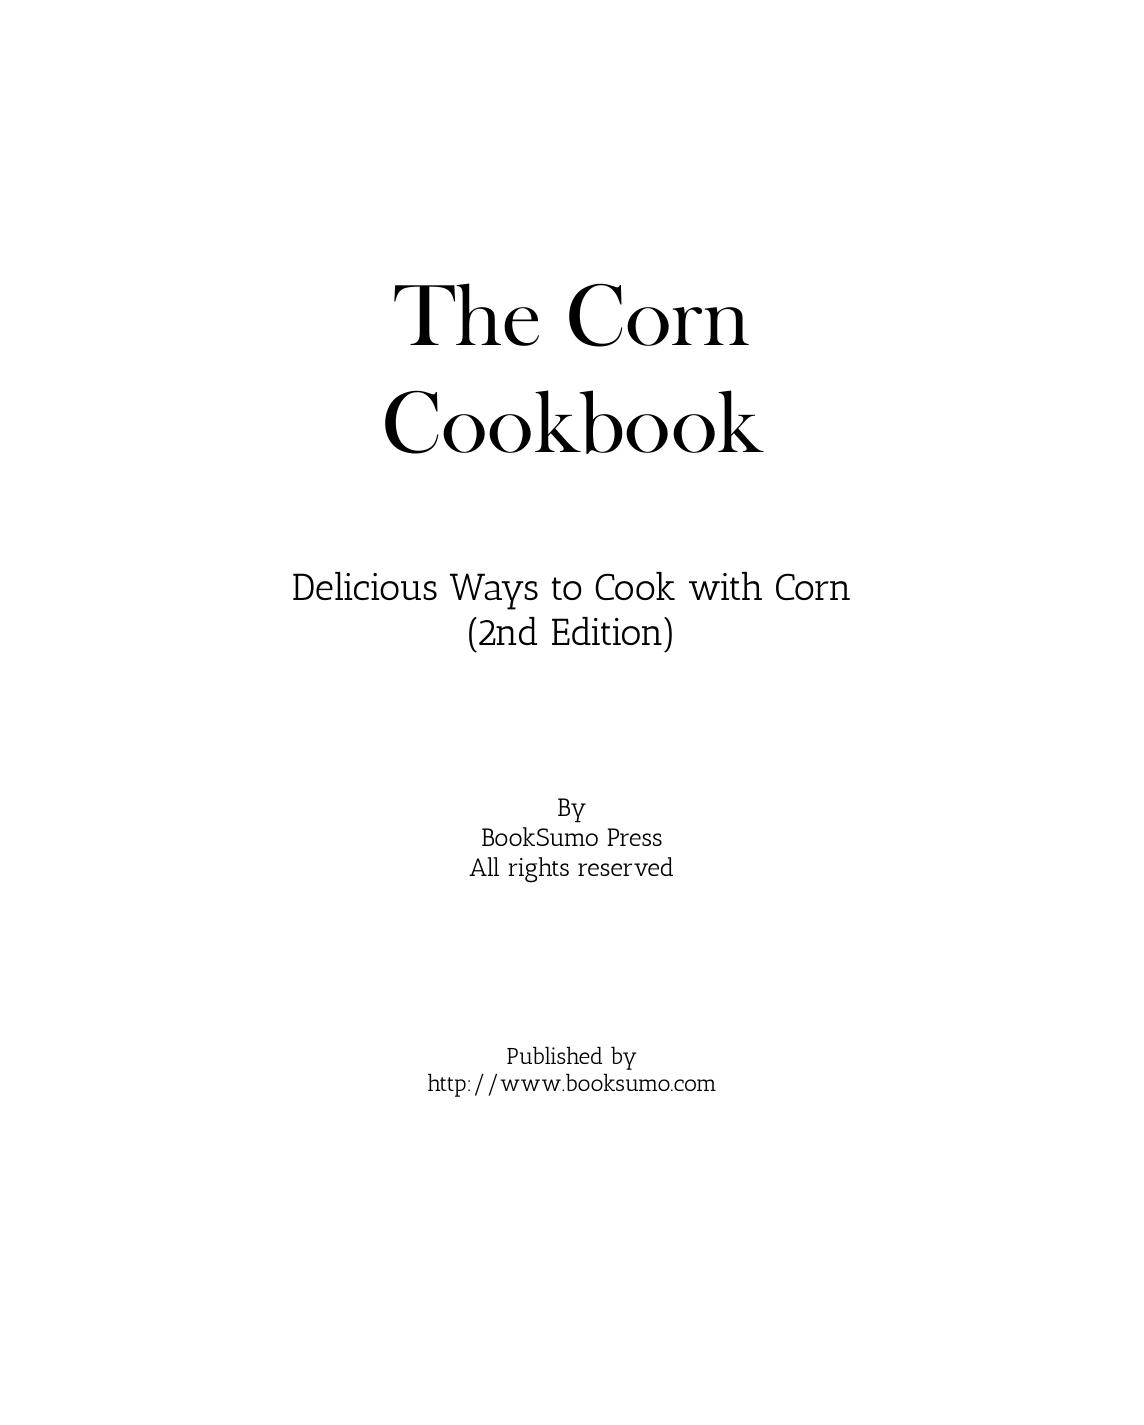 The Corn Cookbook: Delicious Ways to Cook with Corn by BookSumo Press